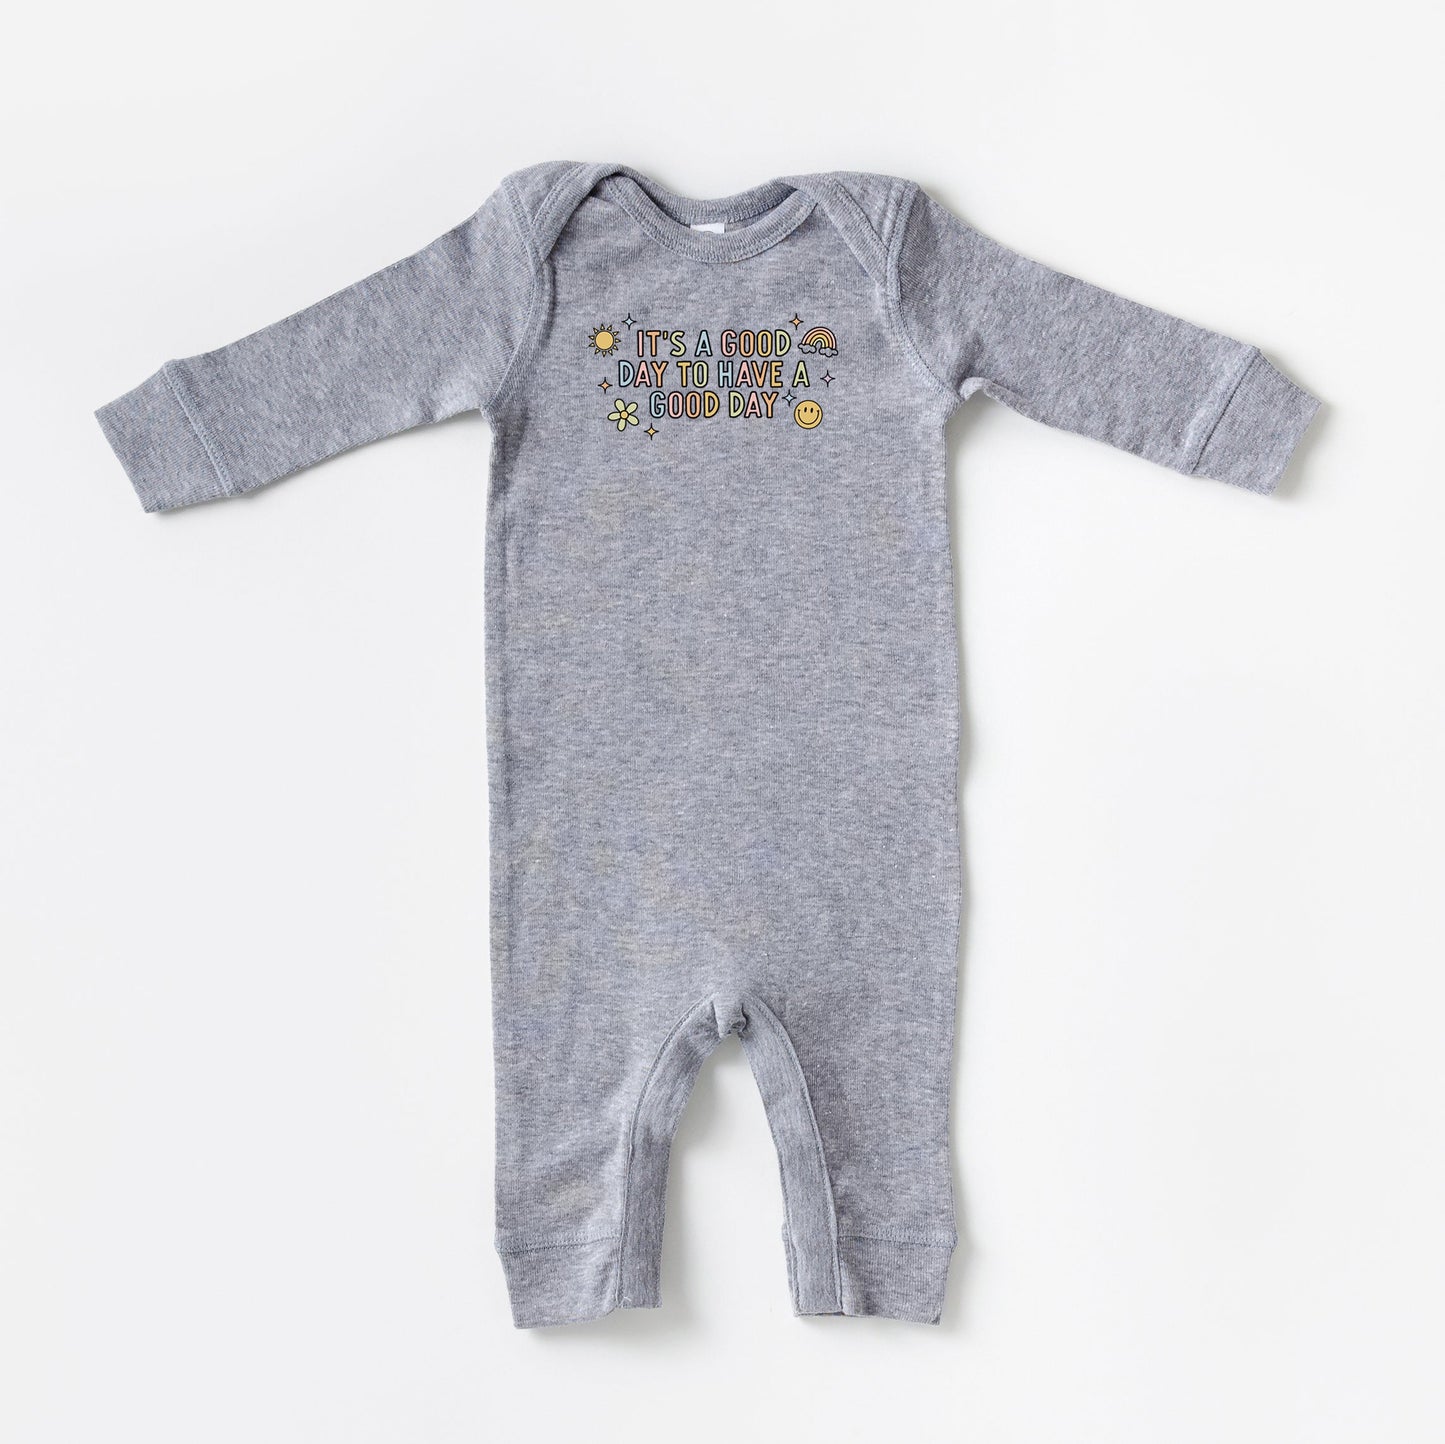 It's A Good Day To Have A Good Day Colorful | Baby Romper